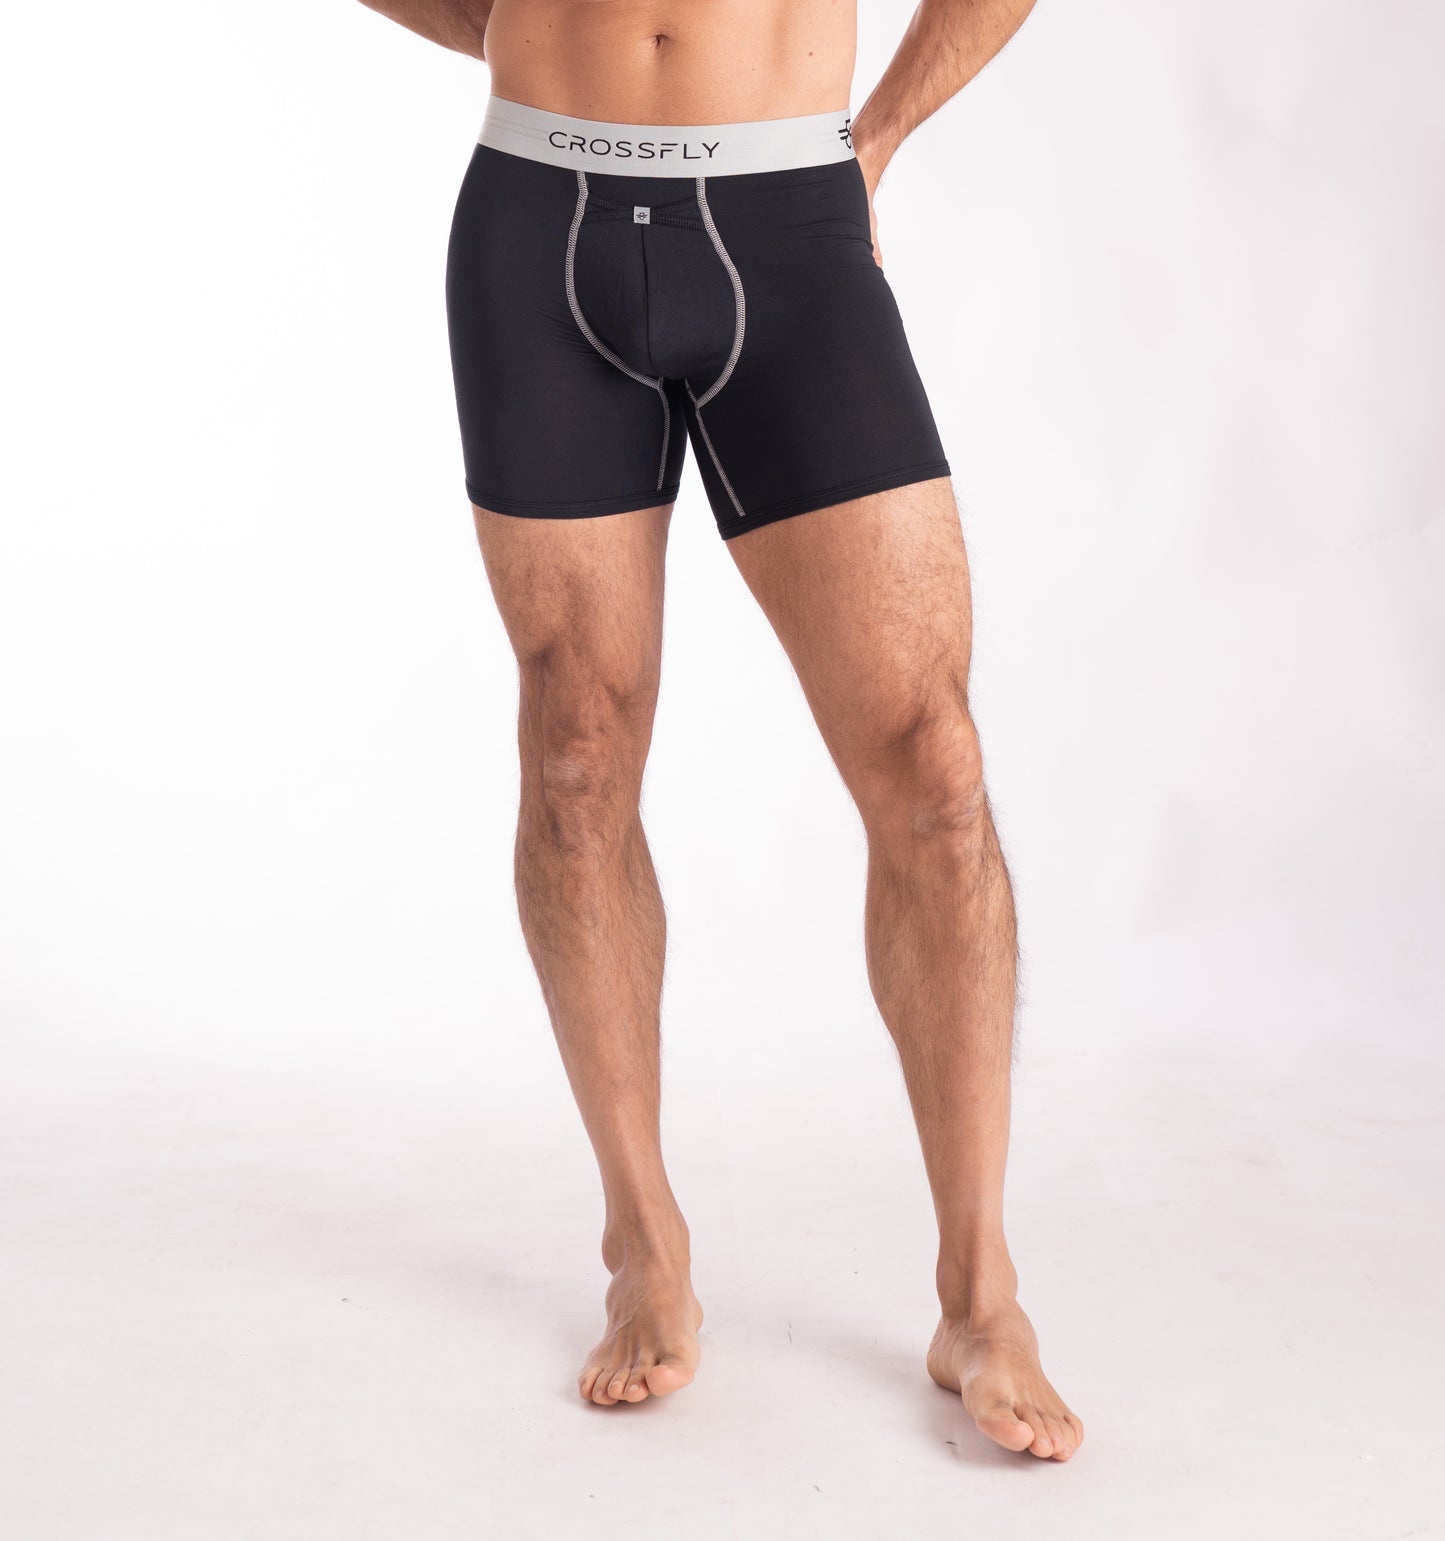 Crossfly men's IKON X 6" black / silver boxers from the Everyday series, featuring X-Fly and Coccoon internal pocket support.